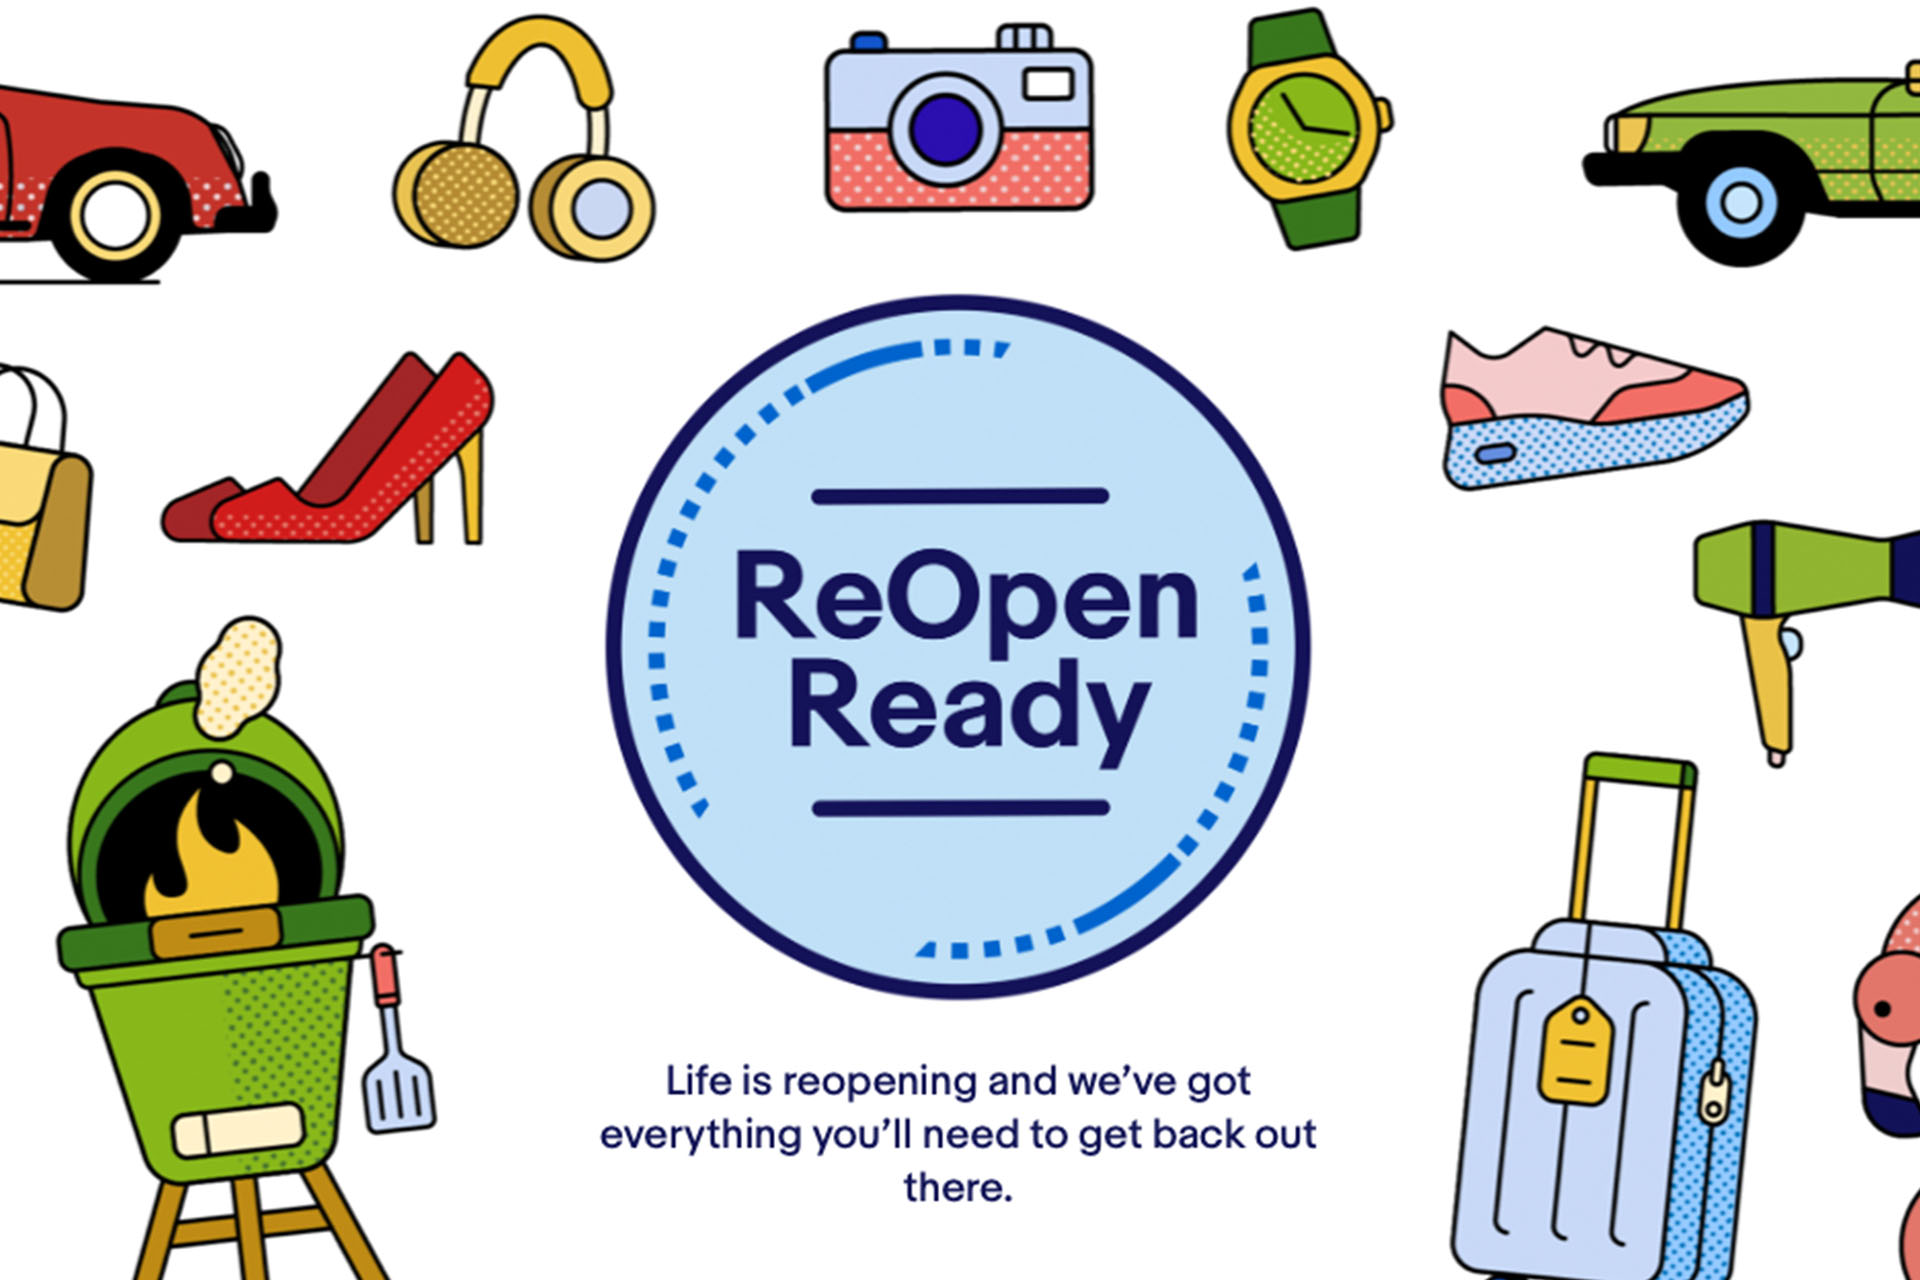 eBay Introduces 'ReOpen Ready' For Post-Pandemic Shopping